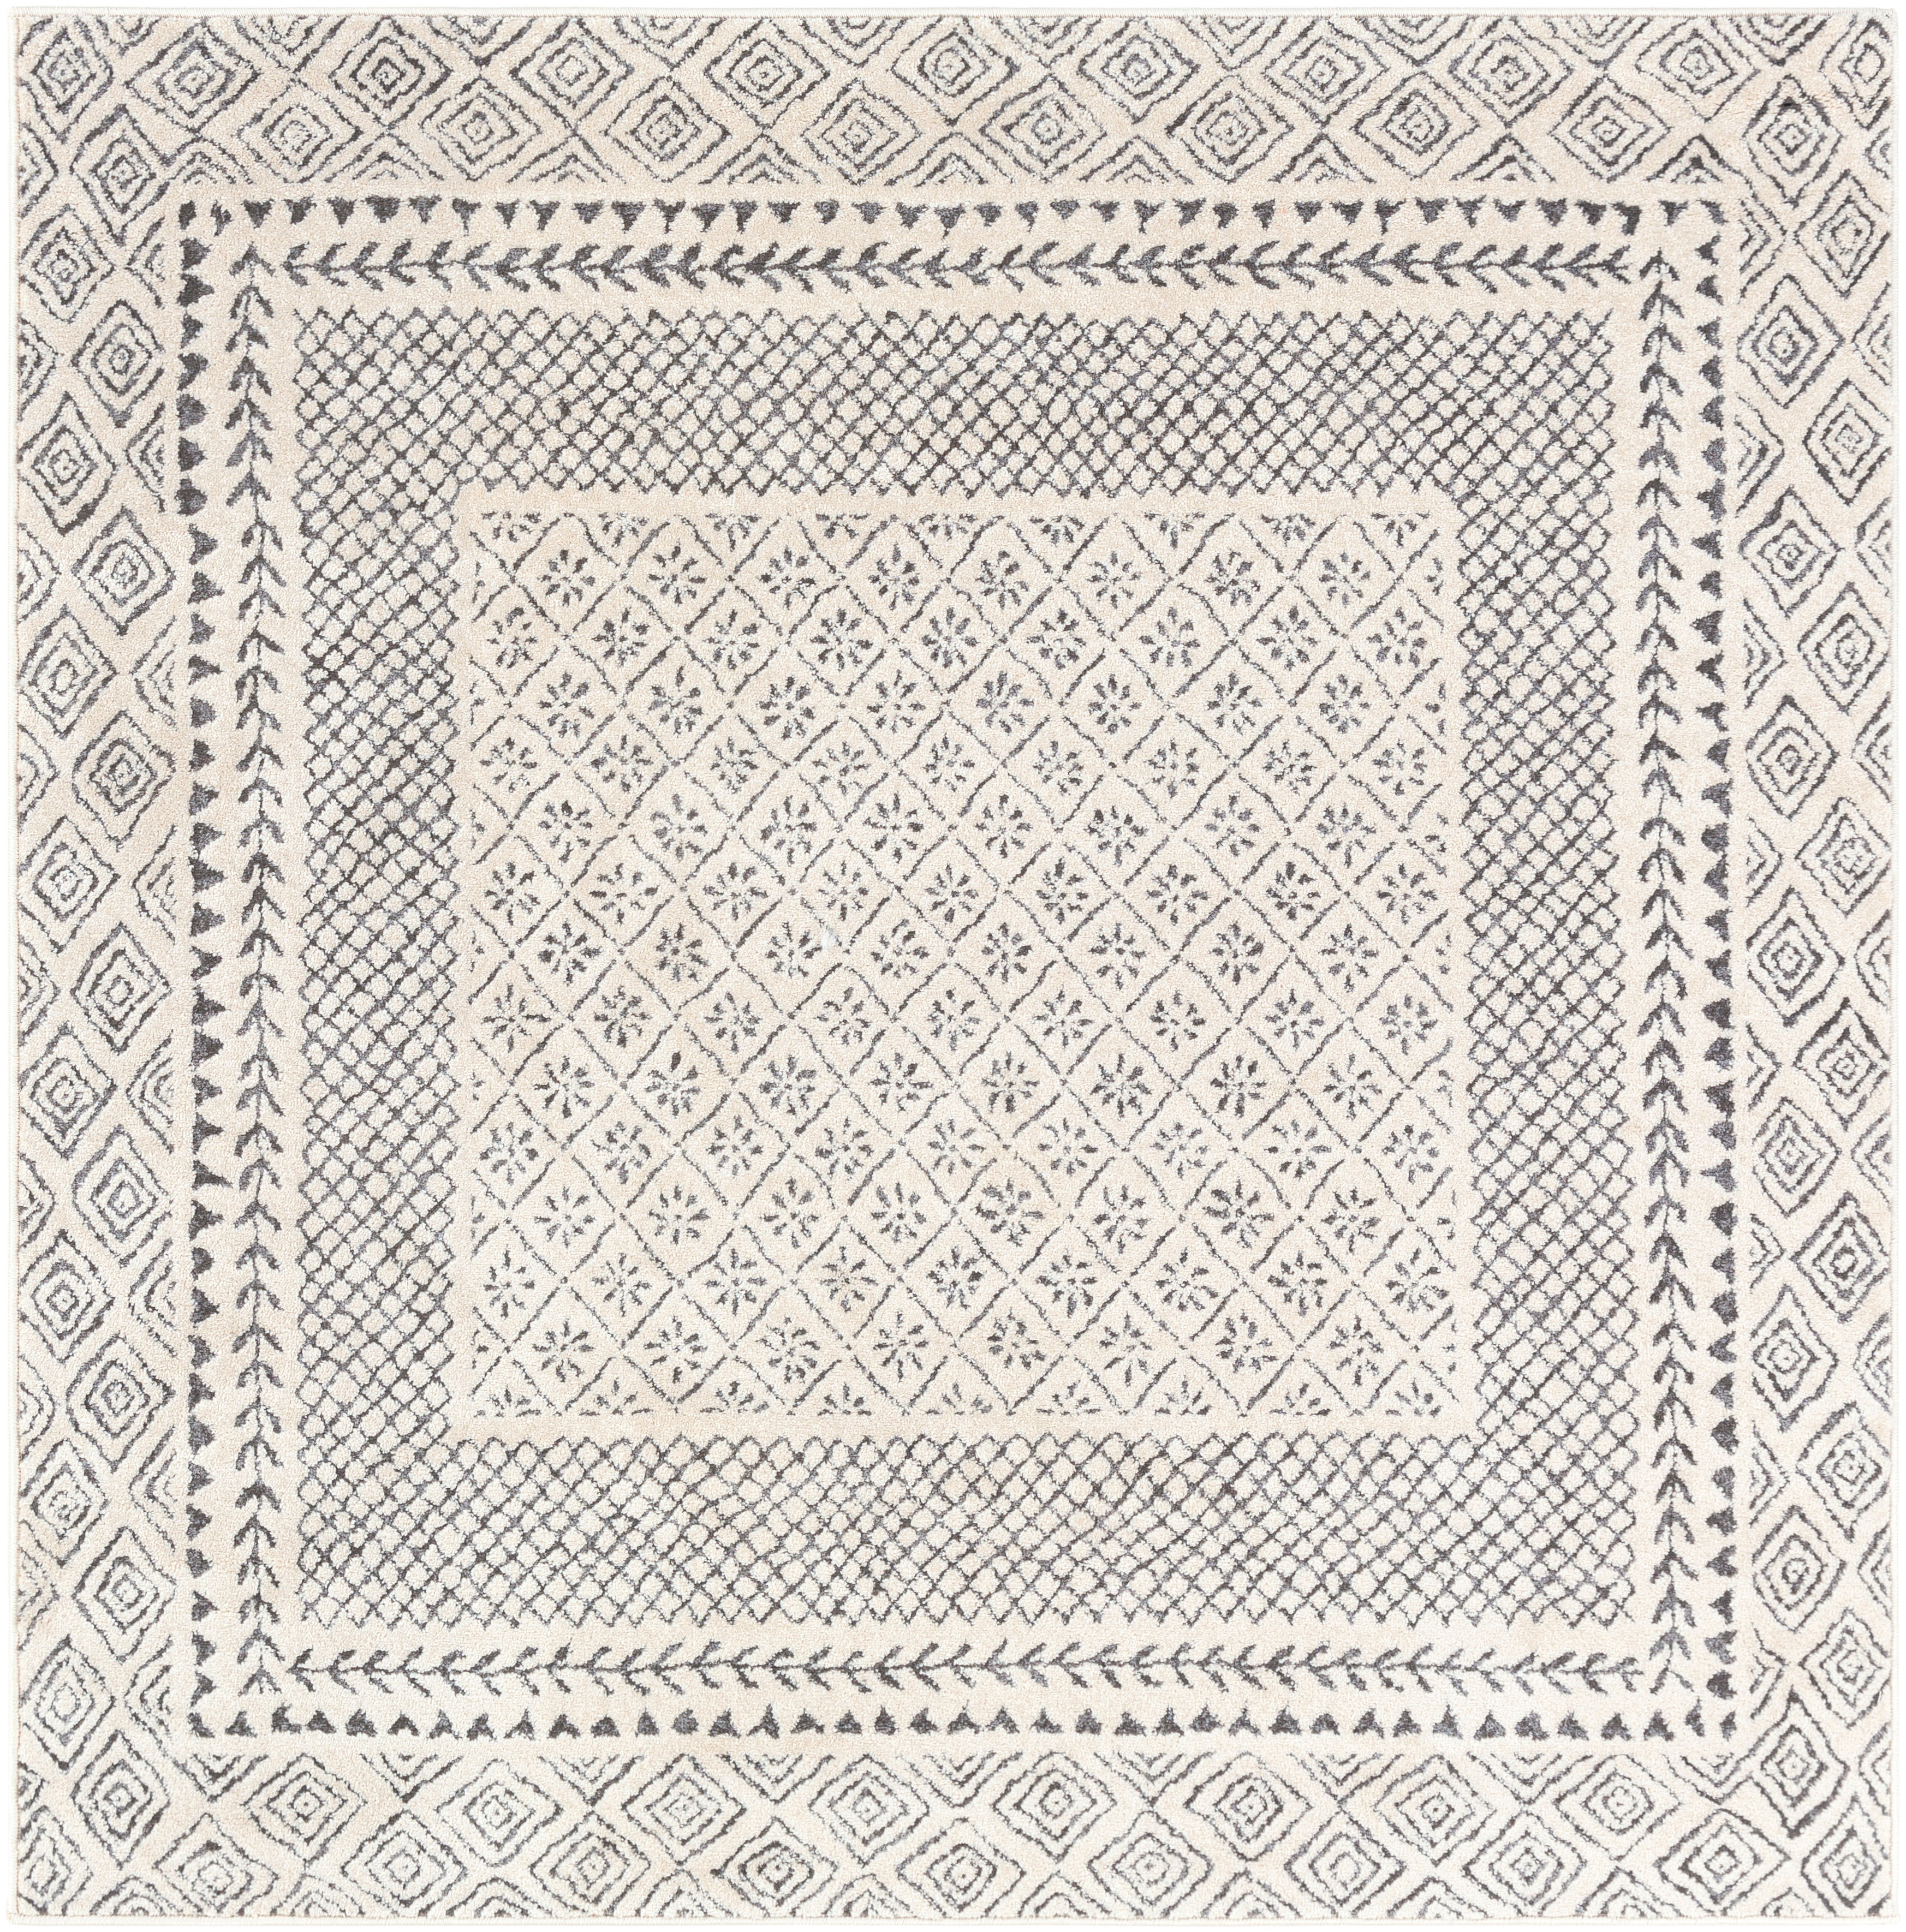 Good Looking square accent rugs Wayfair Square Area Rugs You Ll Love In 2021